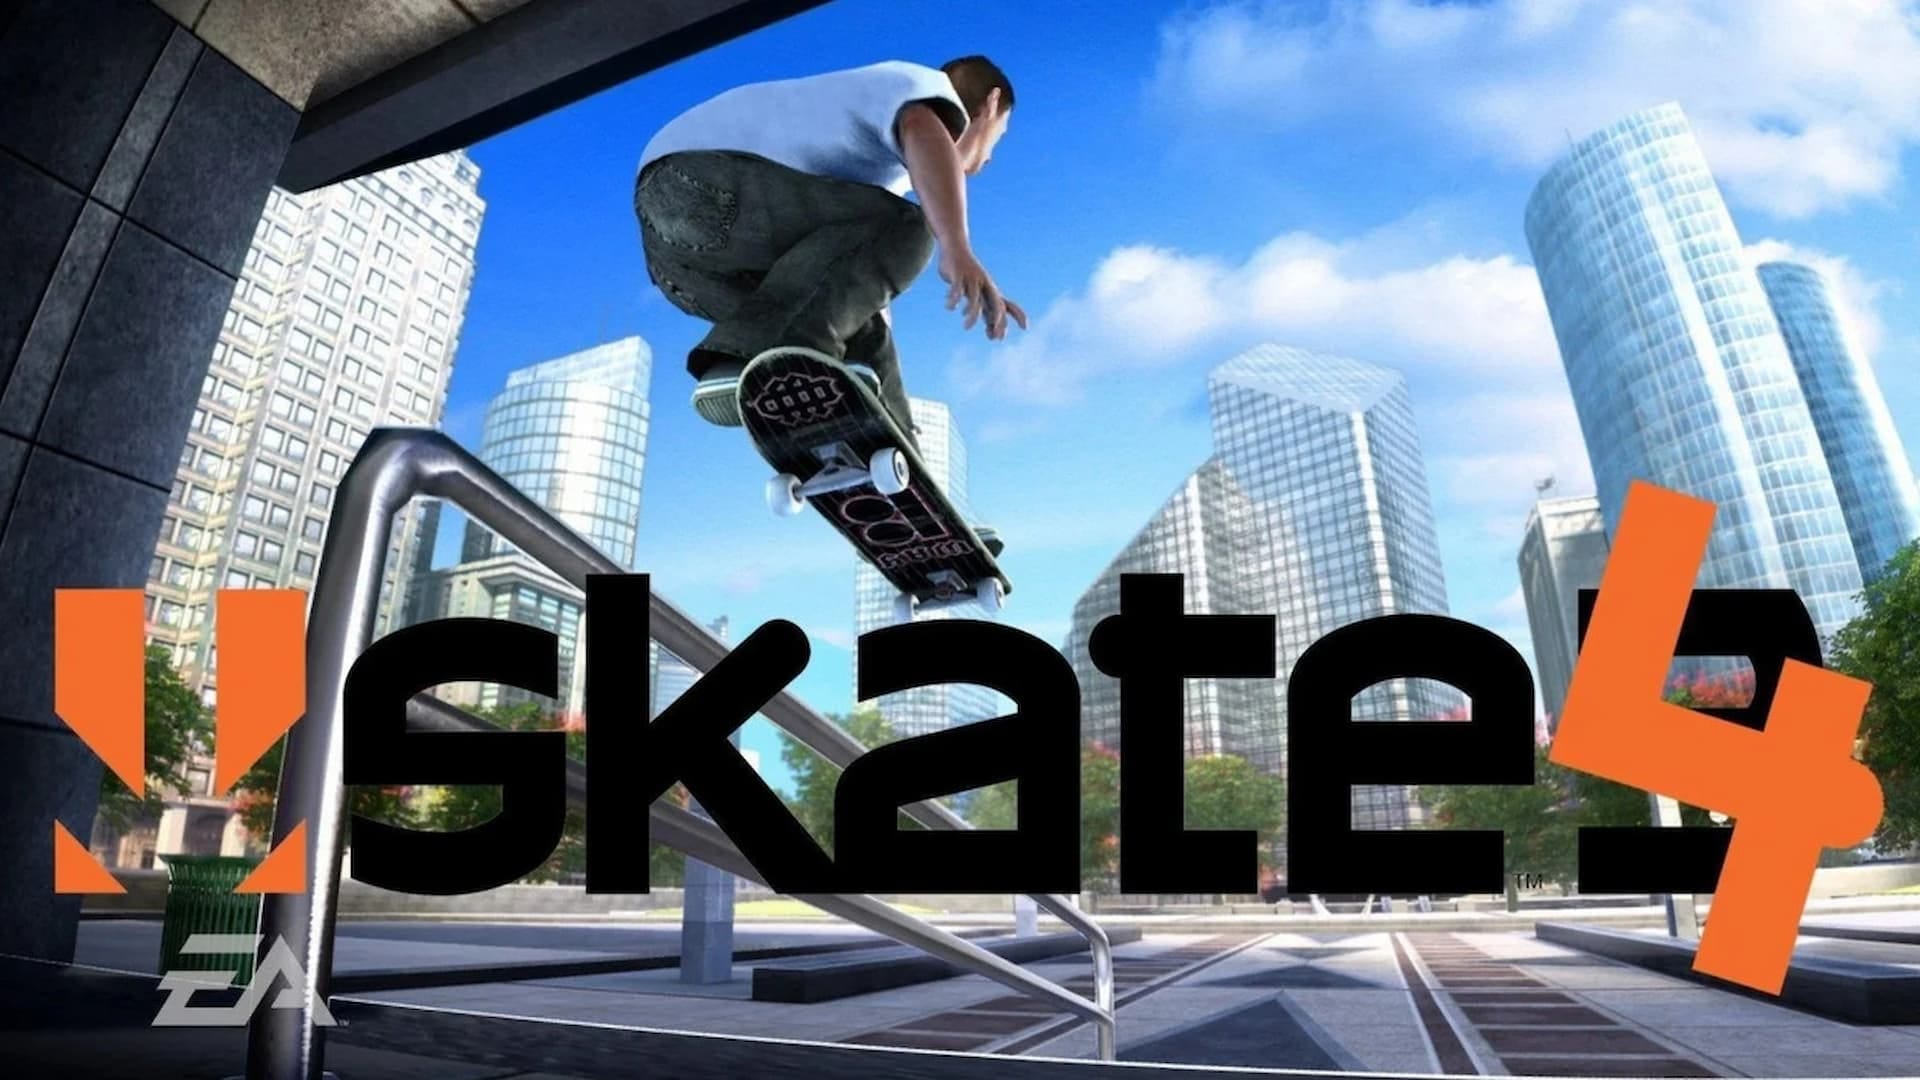 Skate 4 Leaked Videos Show Off Fun City's Massive Multiplayer Space -  GameSpot